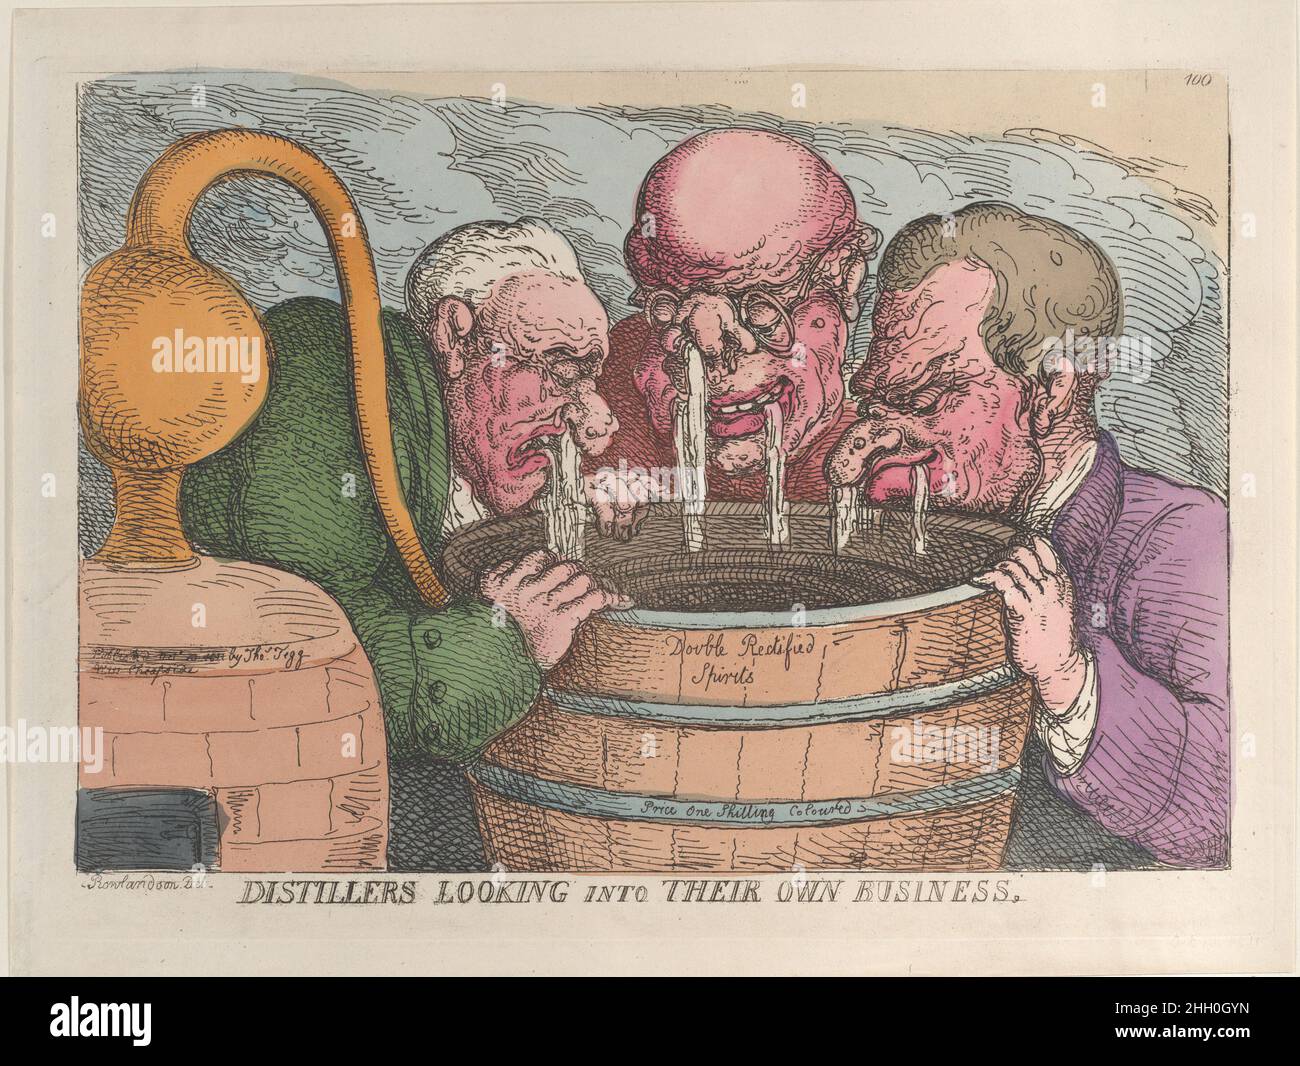 Distillers Looking into Their Own Business October 10, 1811 Thomas Rowlandson A repulsive scene with three old men with grotesque and hideously carbuncled faces looking into a cask of 'Double Rectified Spirits,' while their noses and mouths stream copiously.. Distillers Looking into Their Own Business. Thomas Rowlandson (British, London 1757–1827 London). October 10, 1811. Hand-colored etching. Thomas Tegg (British, 1776–1846). Portfolio Covers Stock Photo